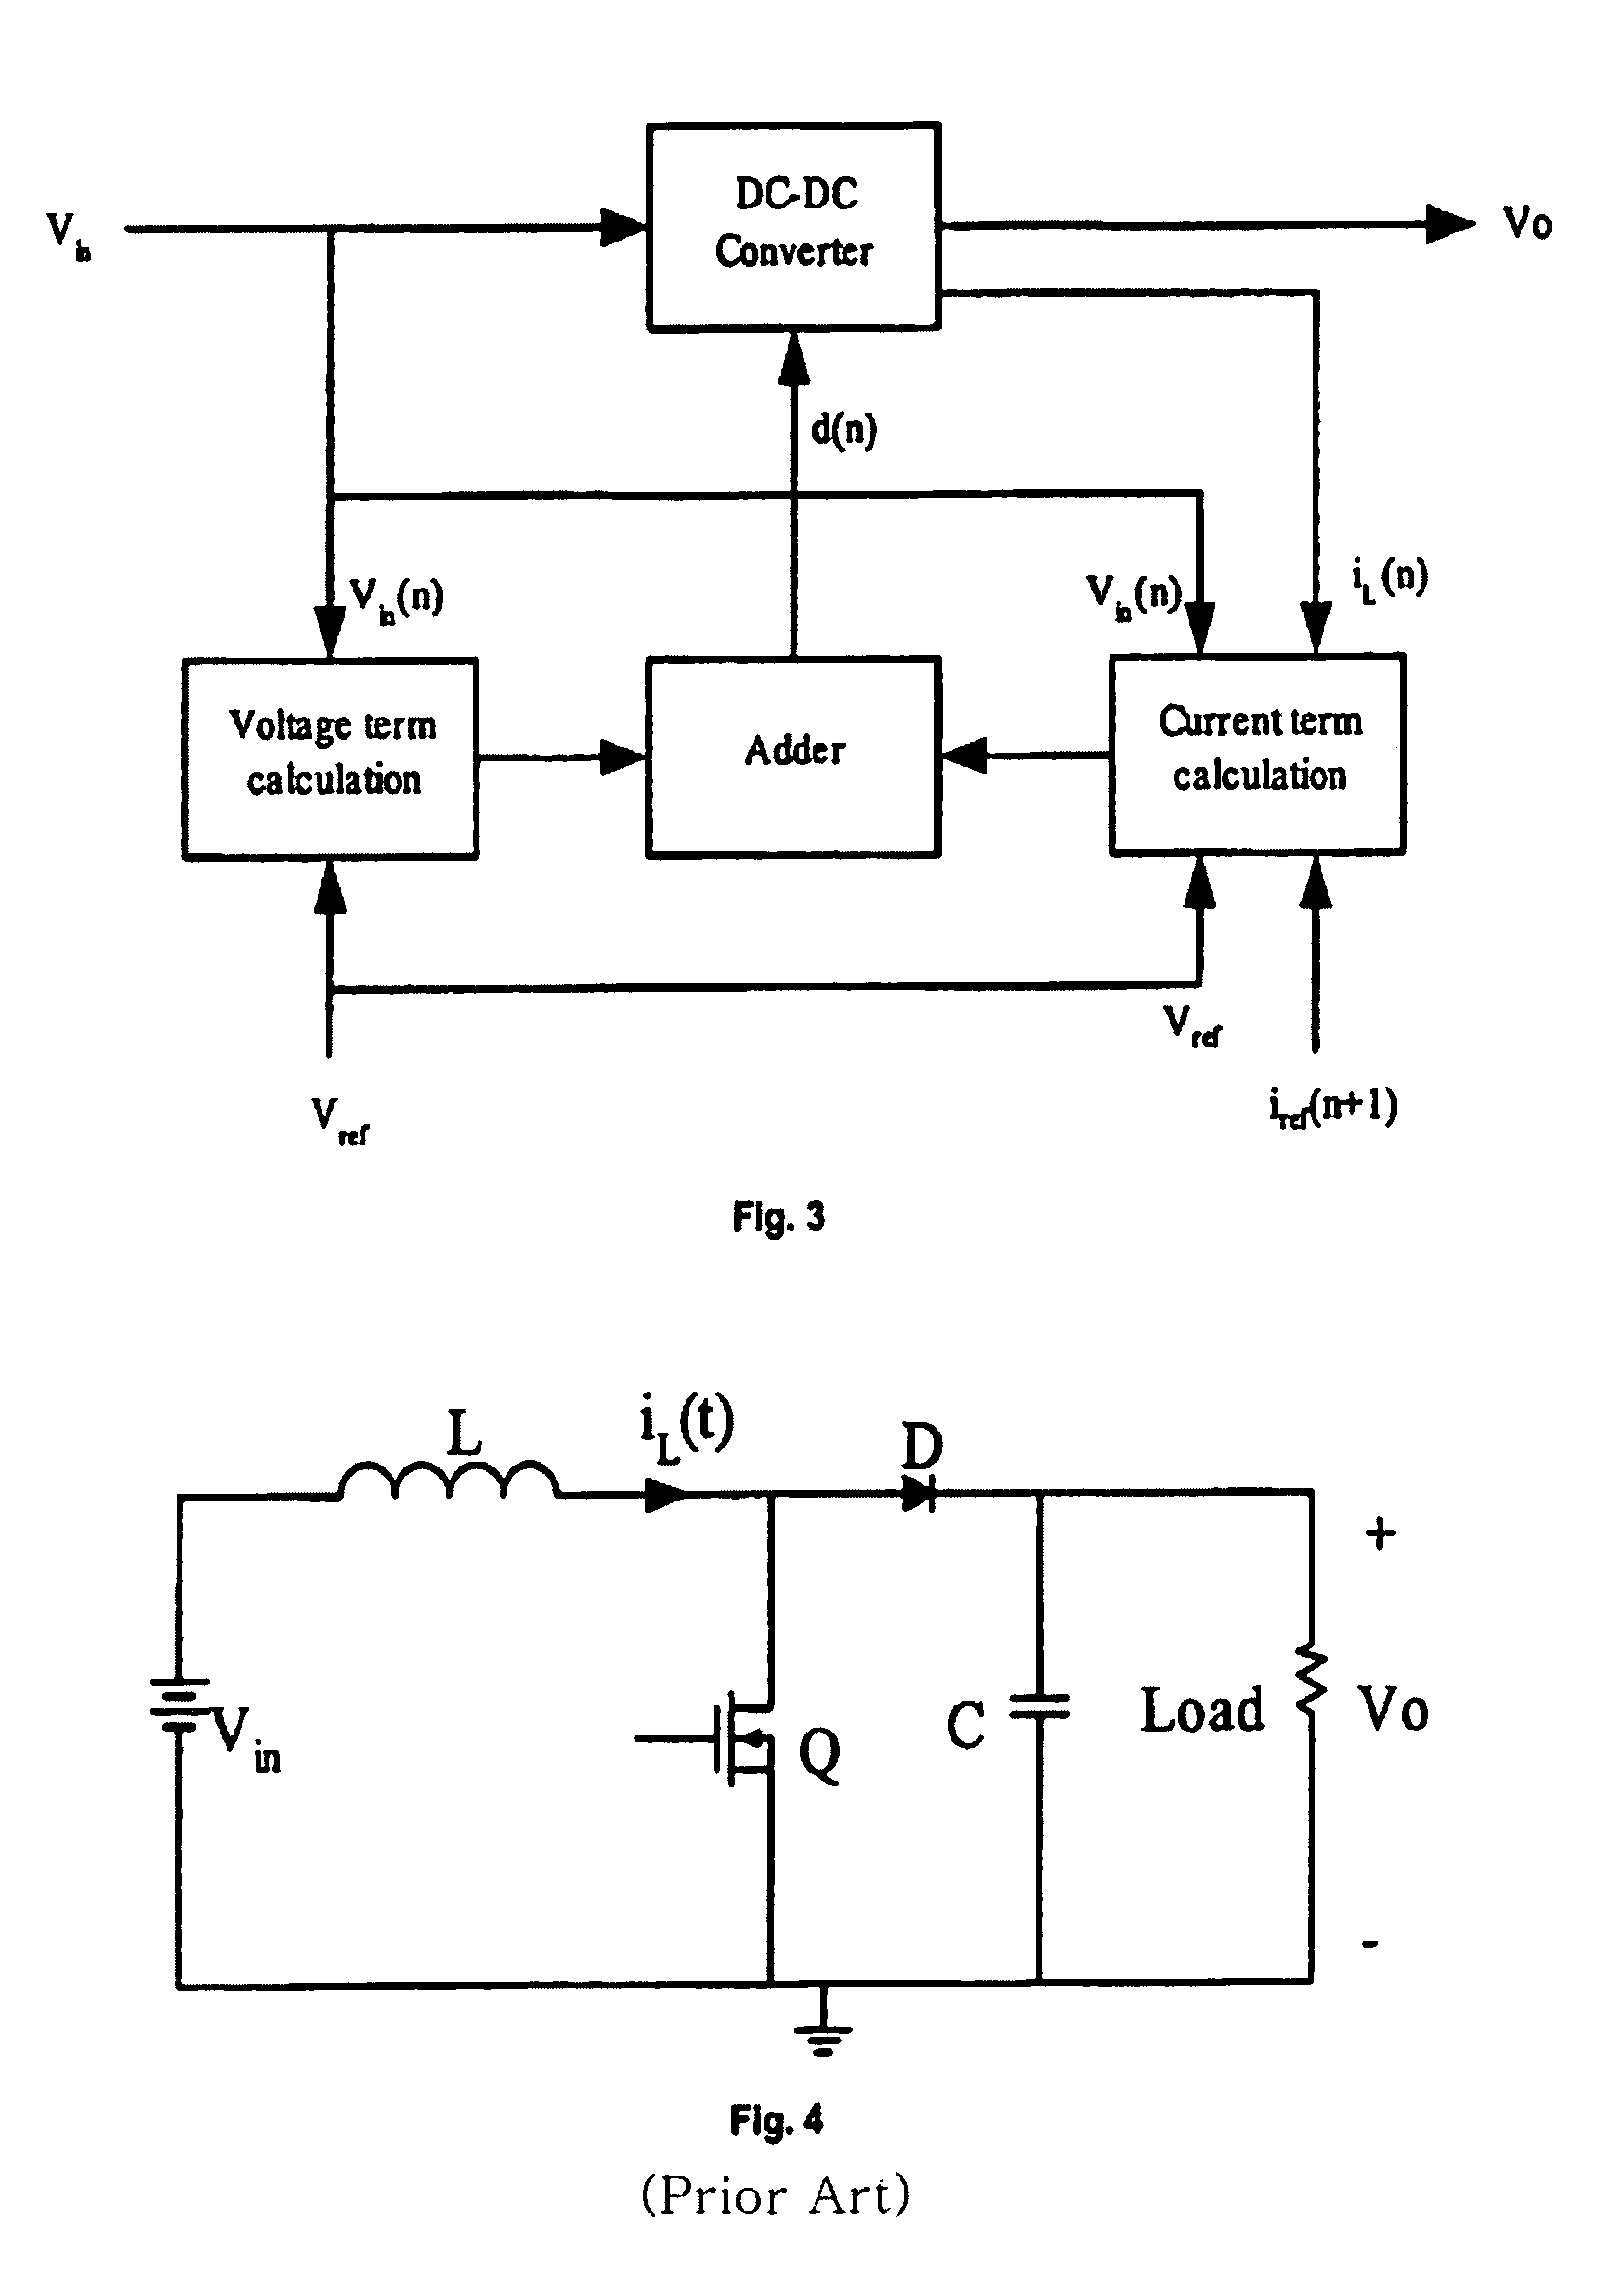 Parallel current mode control using a direct duty cycle algorithm with low computational requirements to perform power factor correction